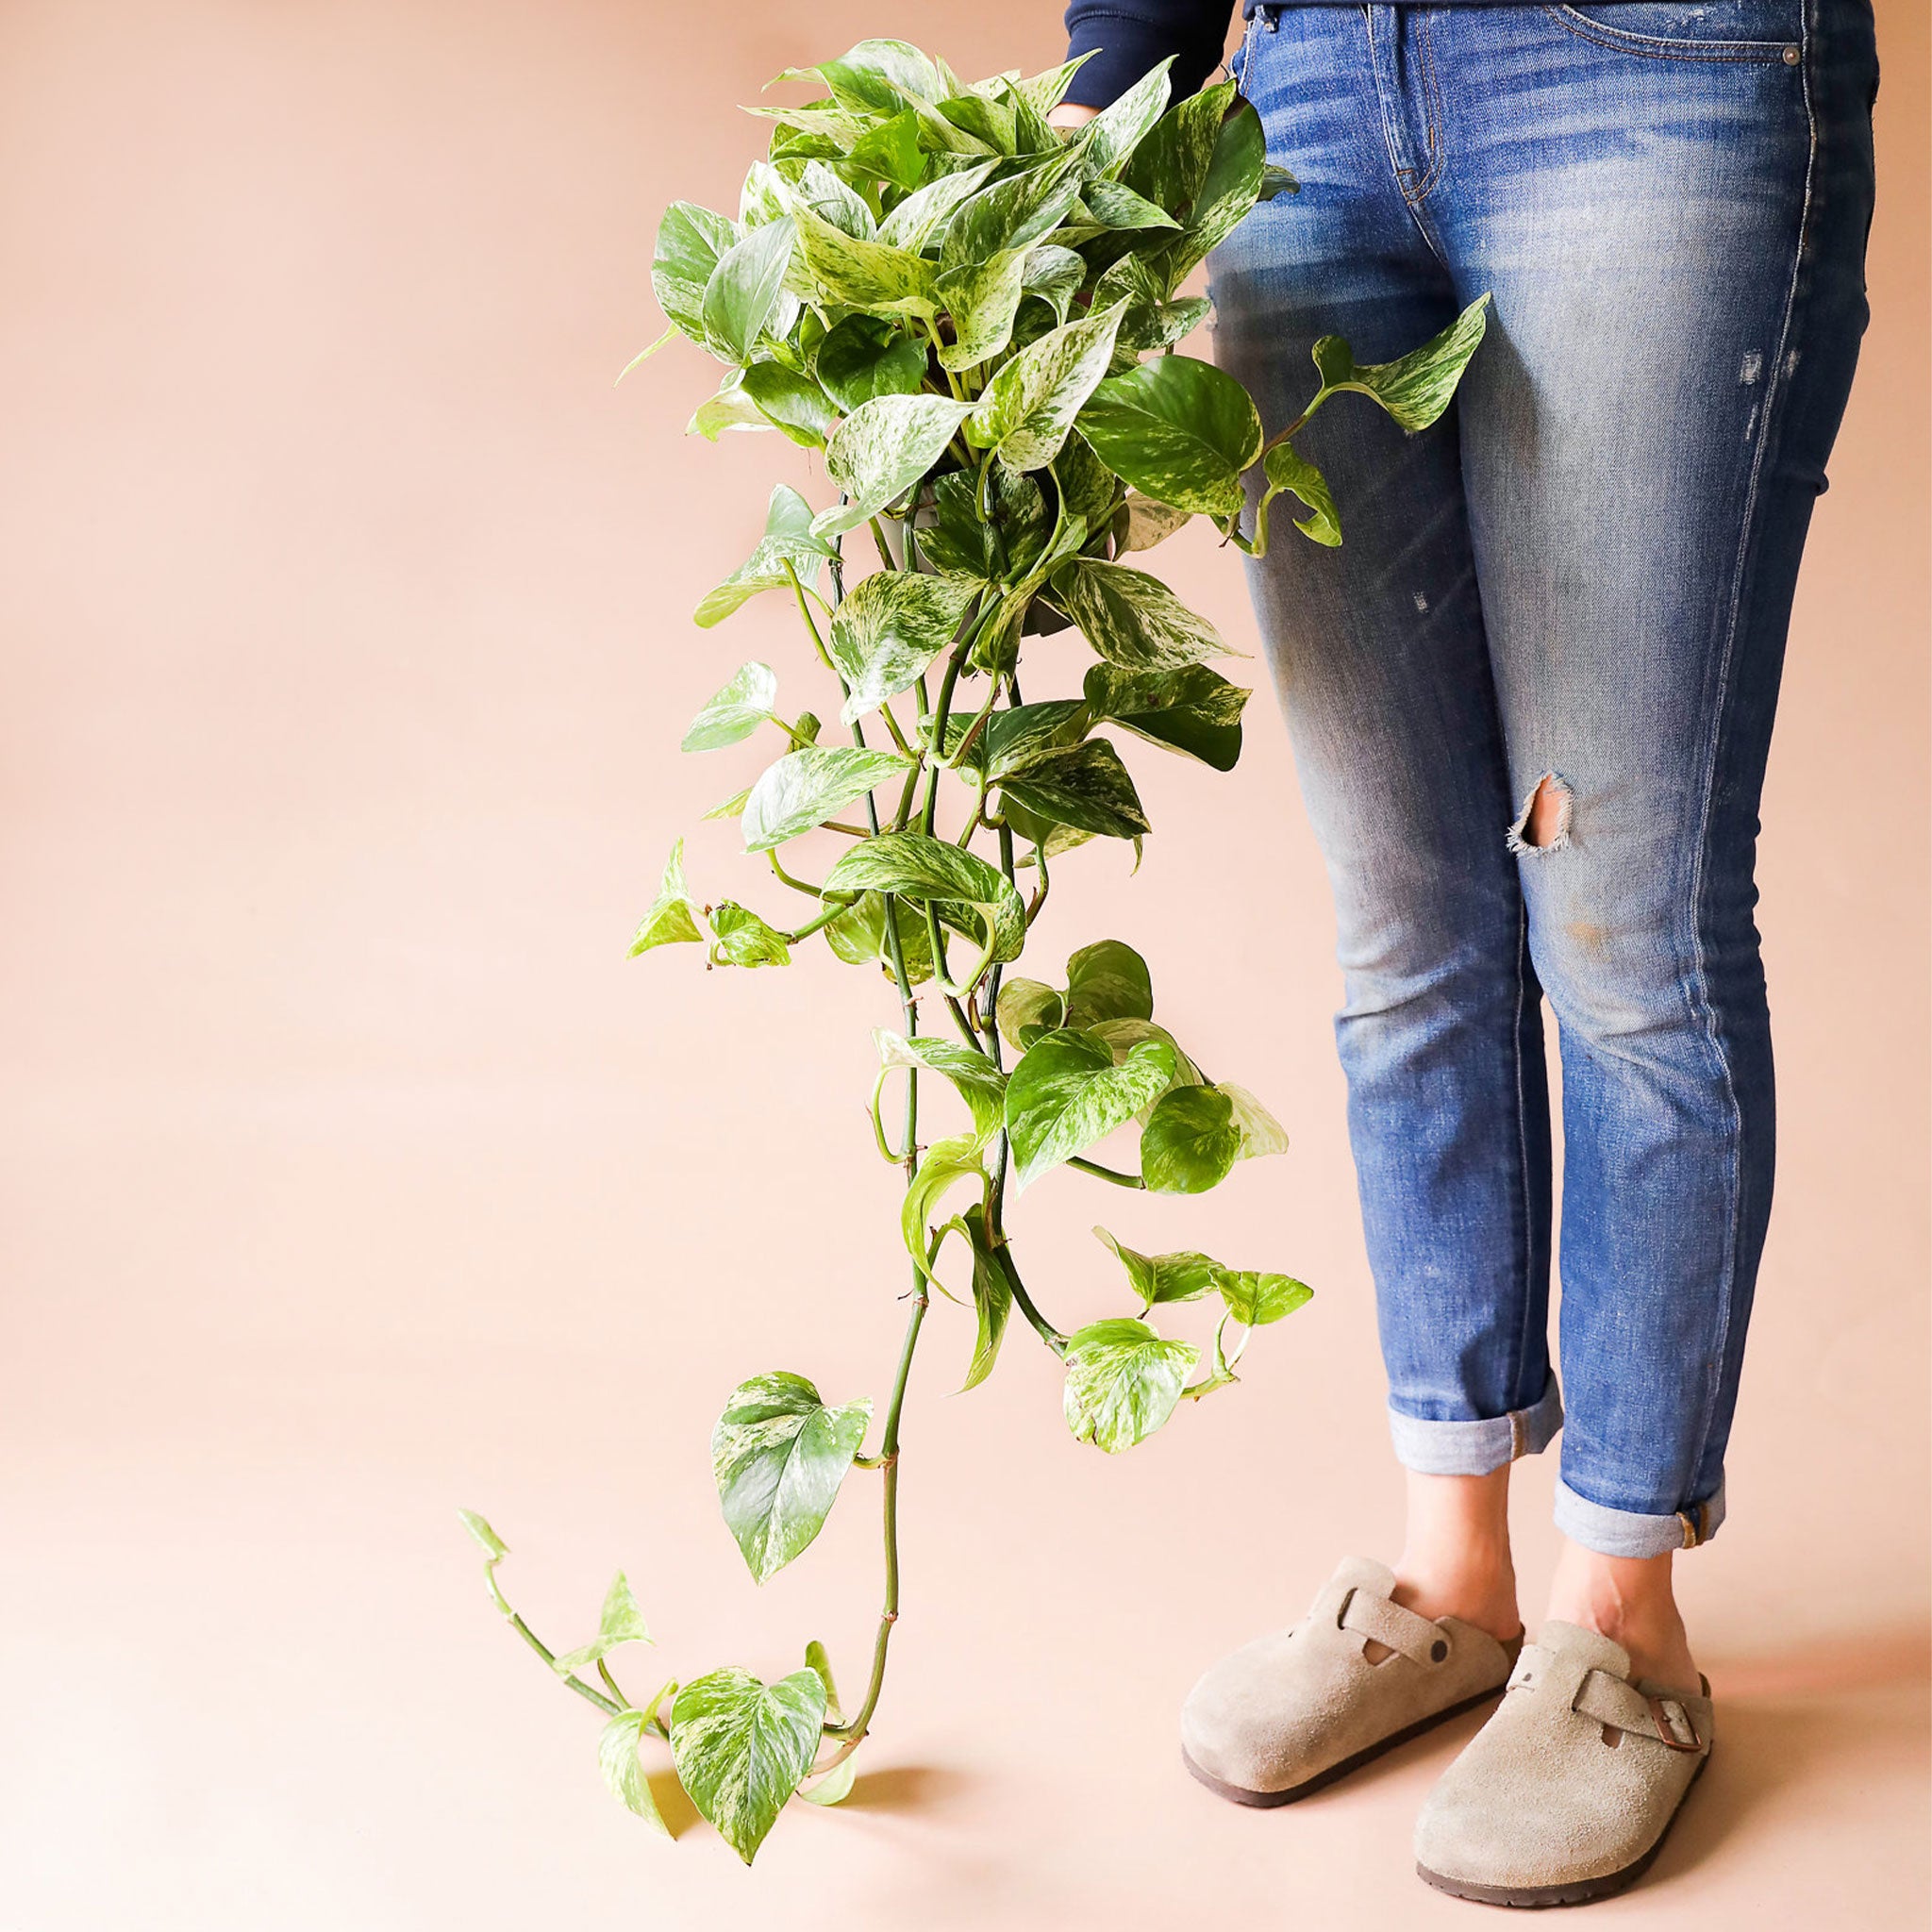 wearing blue jeans and a navy blue sweatshirt. She is holding a marble queen pothos. It has long green vines that fall to the ground. The leaves are green and yellow variegated.